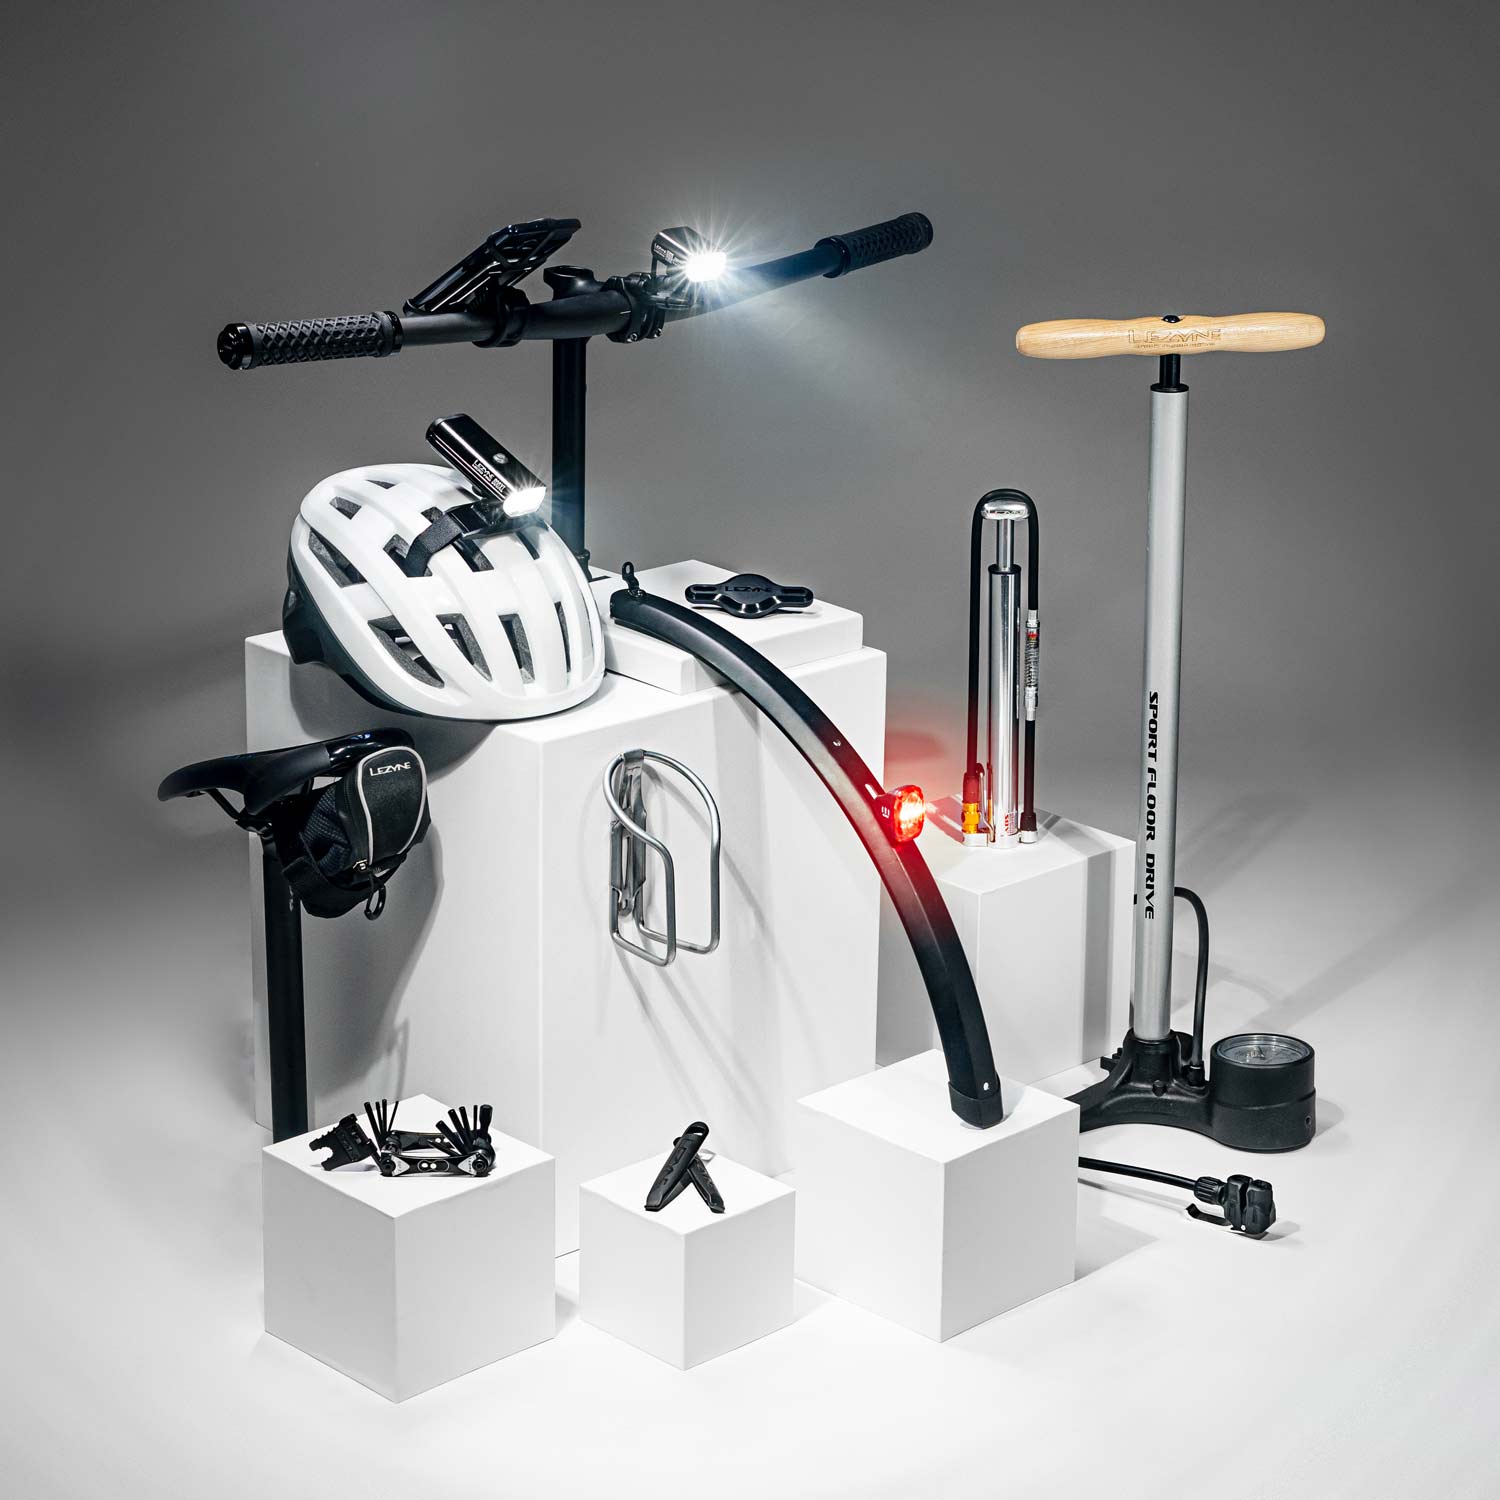 Bicycle tools, bags, lights pumps, and mounts on display podiums with the parts of a bicycle that they attach to. 